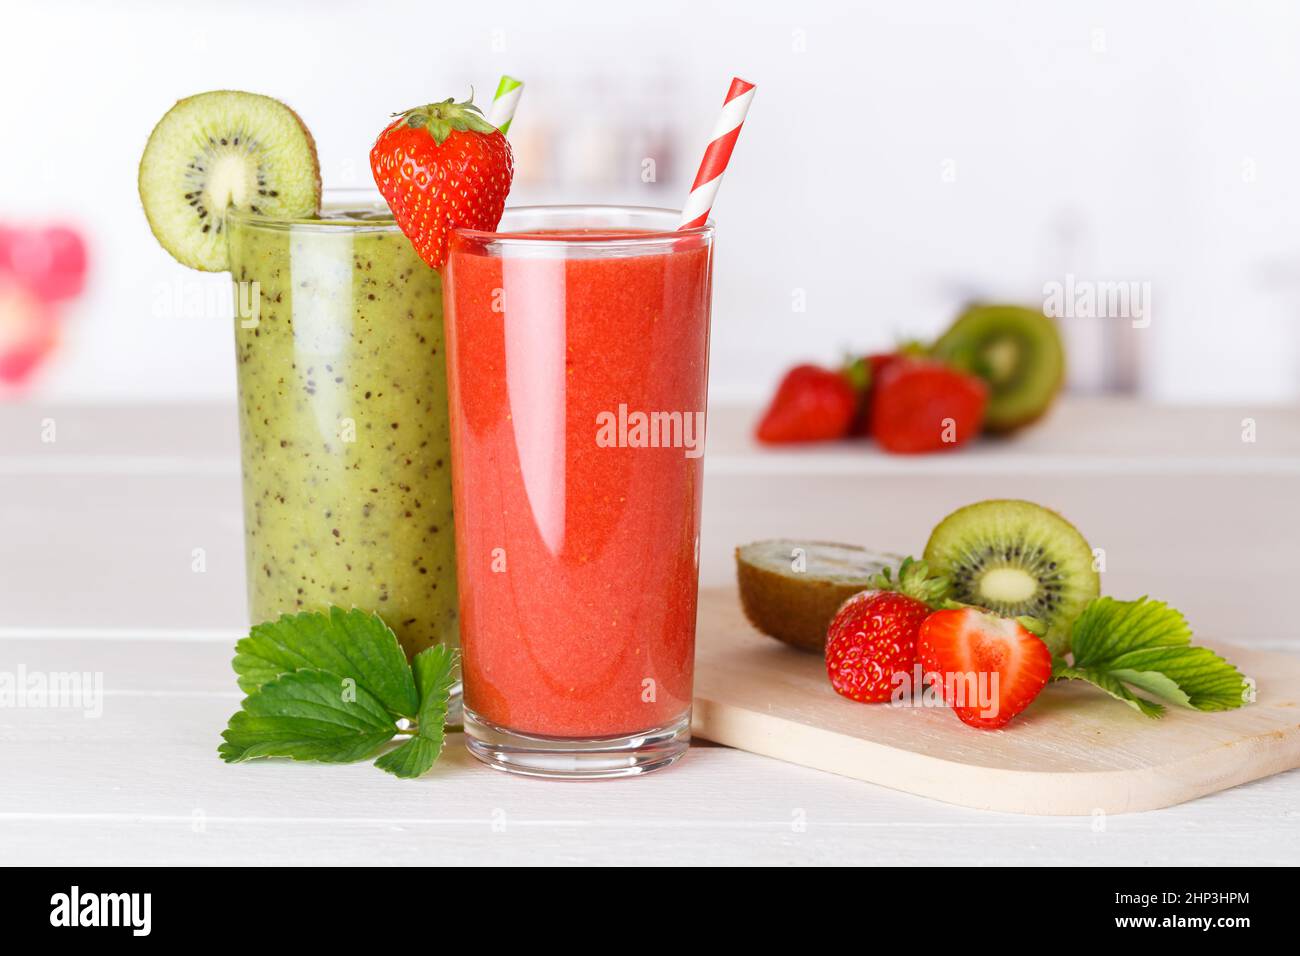 Smoothies Green smoothie fruit juice healthy drinks fruits drink in a glass Stock Photo